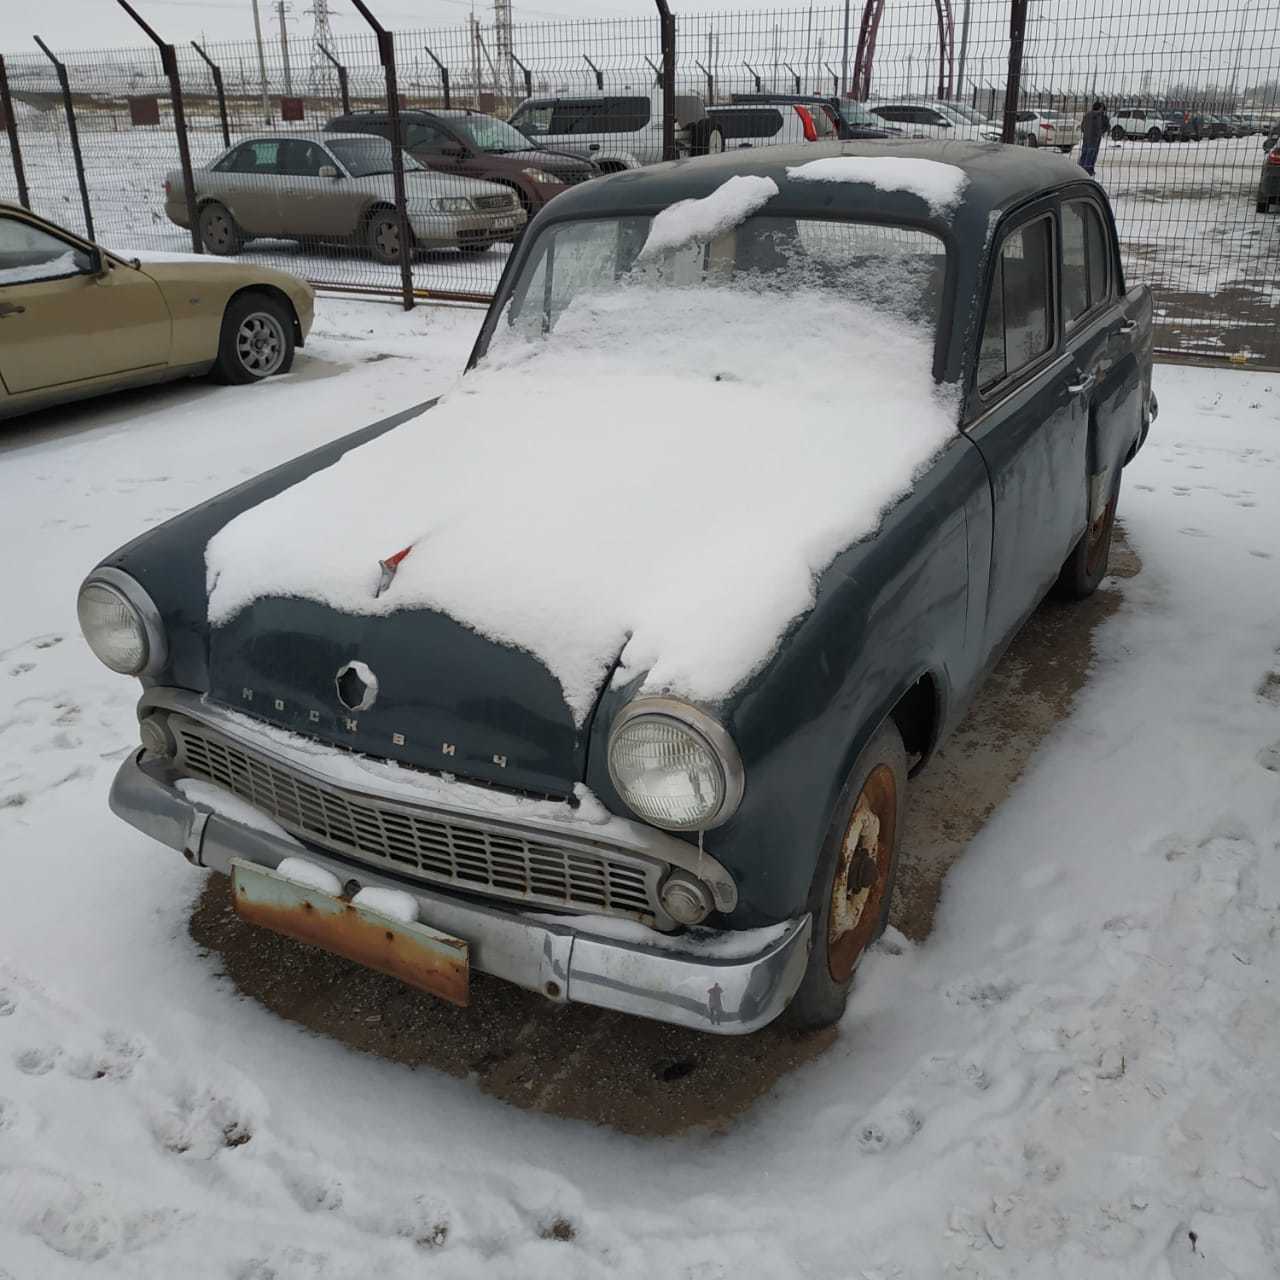 Residents of the Karaganda region will be able to see rare cars in the open-air museum - Retro car, , Kazakhstan, Karaganda region, Auto, , Museum, Longpost